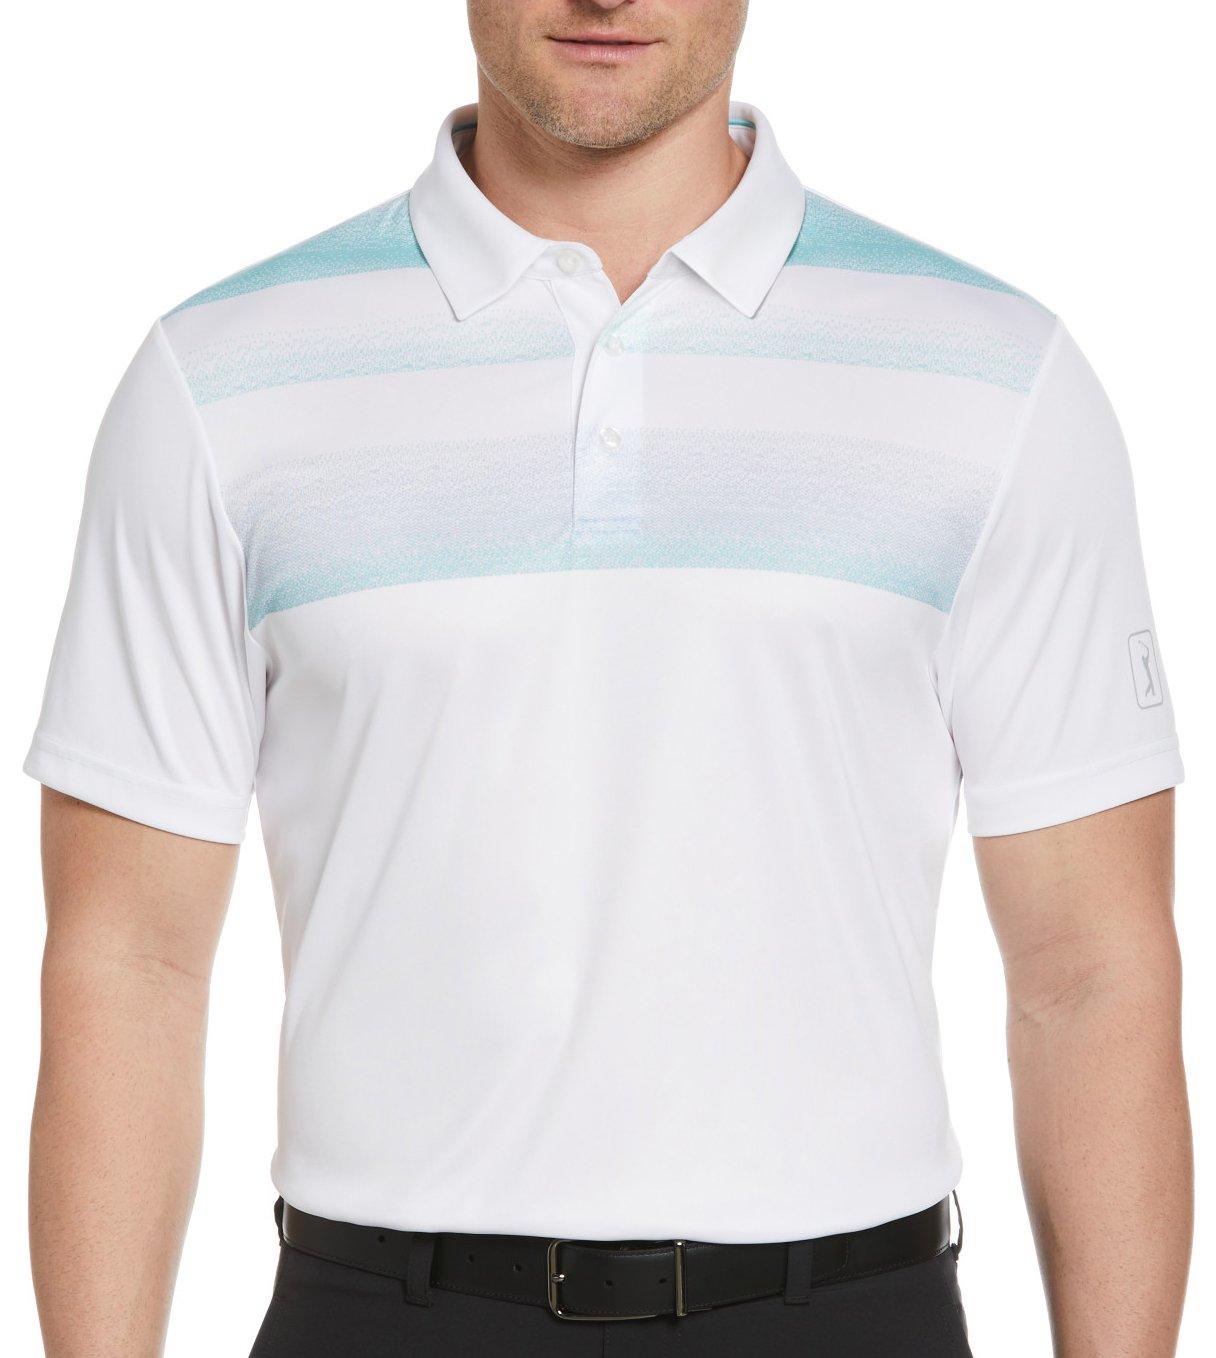 Mens Stitched Chest Polo Shirt